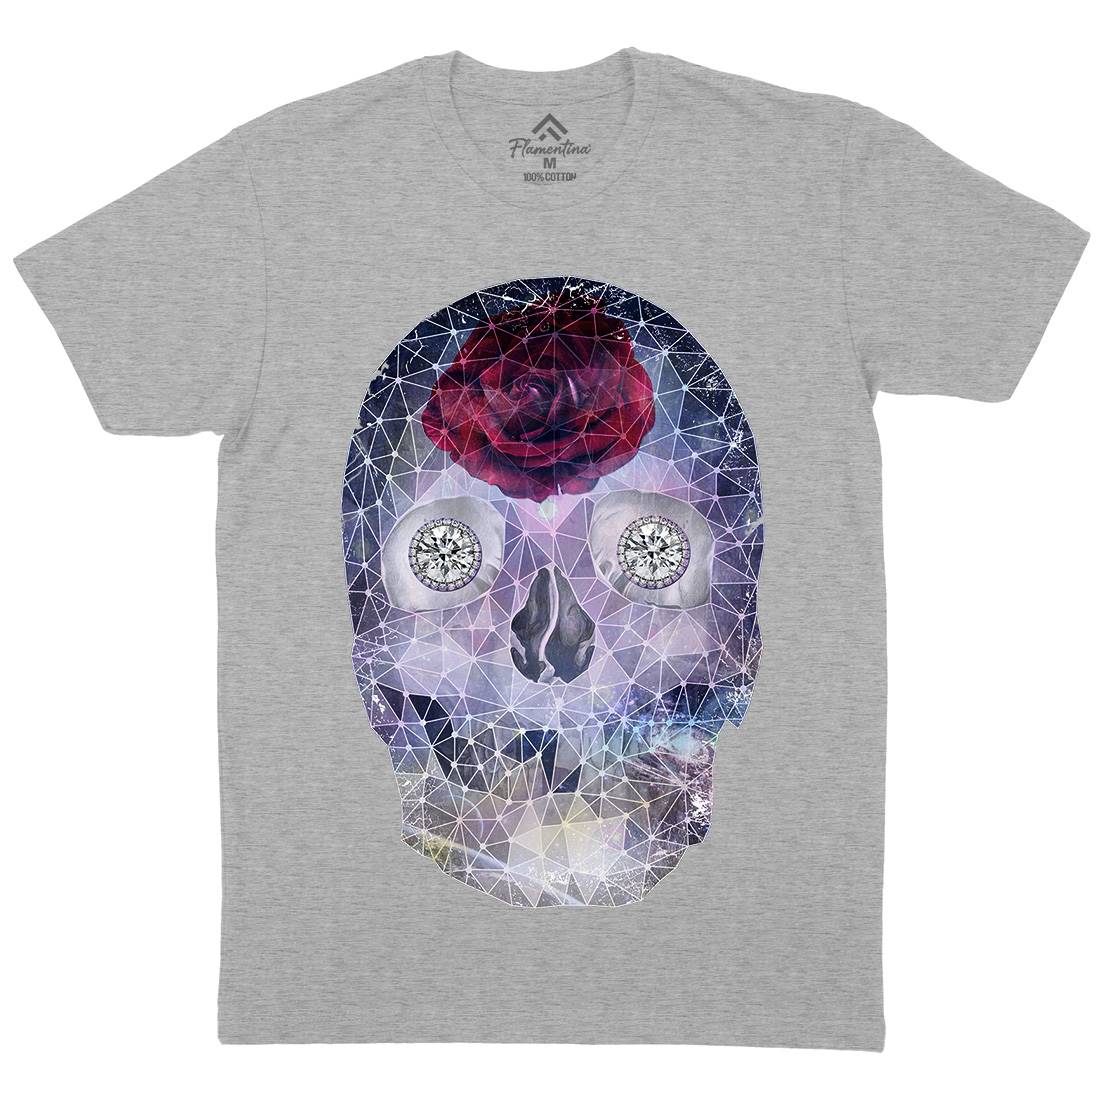 Crystal Skull Mens Crew Neck T-Shirt Space A816